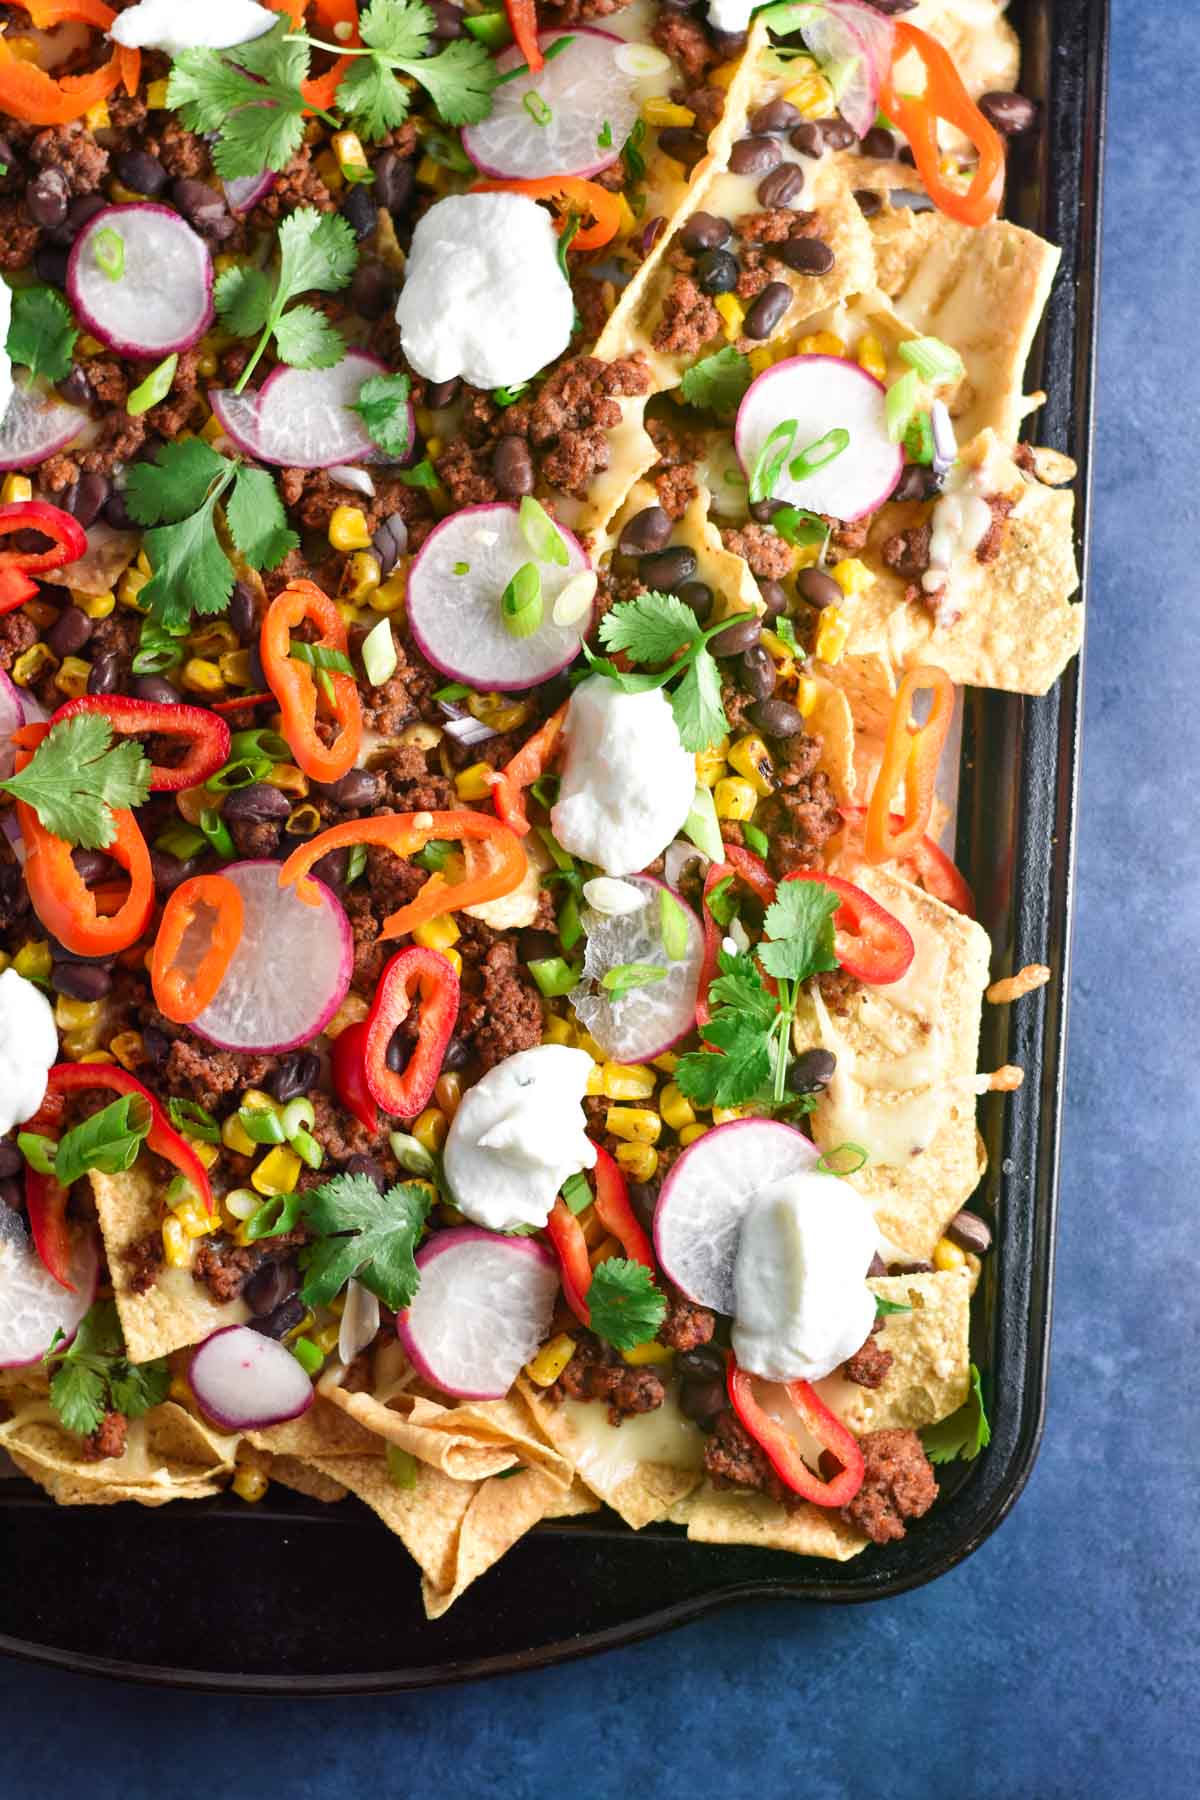 Ground beef nachos with cheese, cilantro, and vegetables.